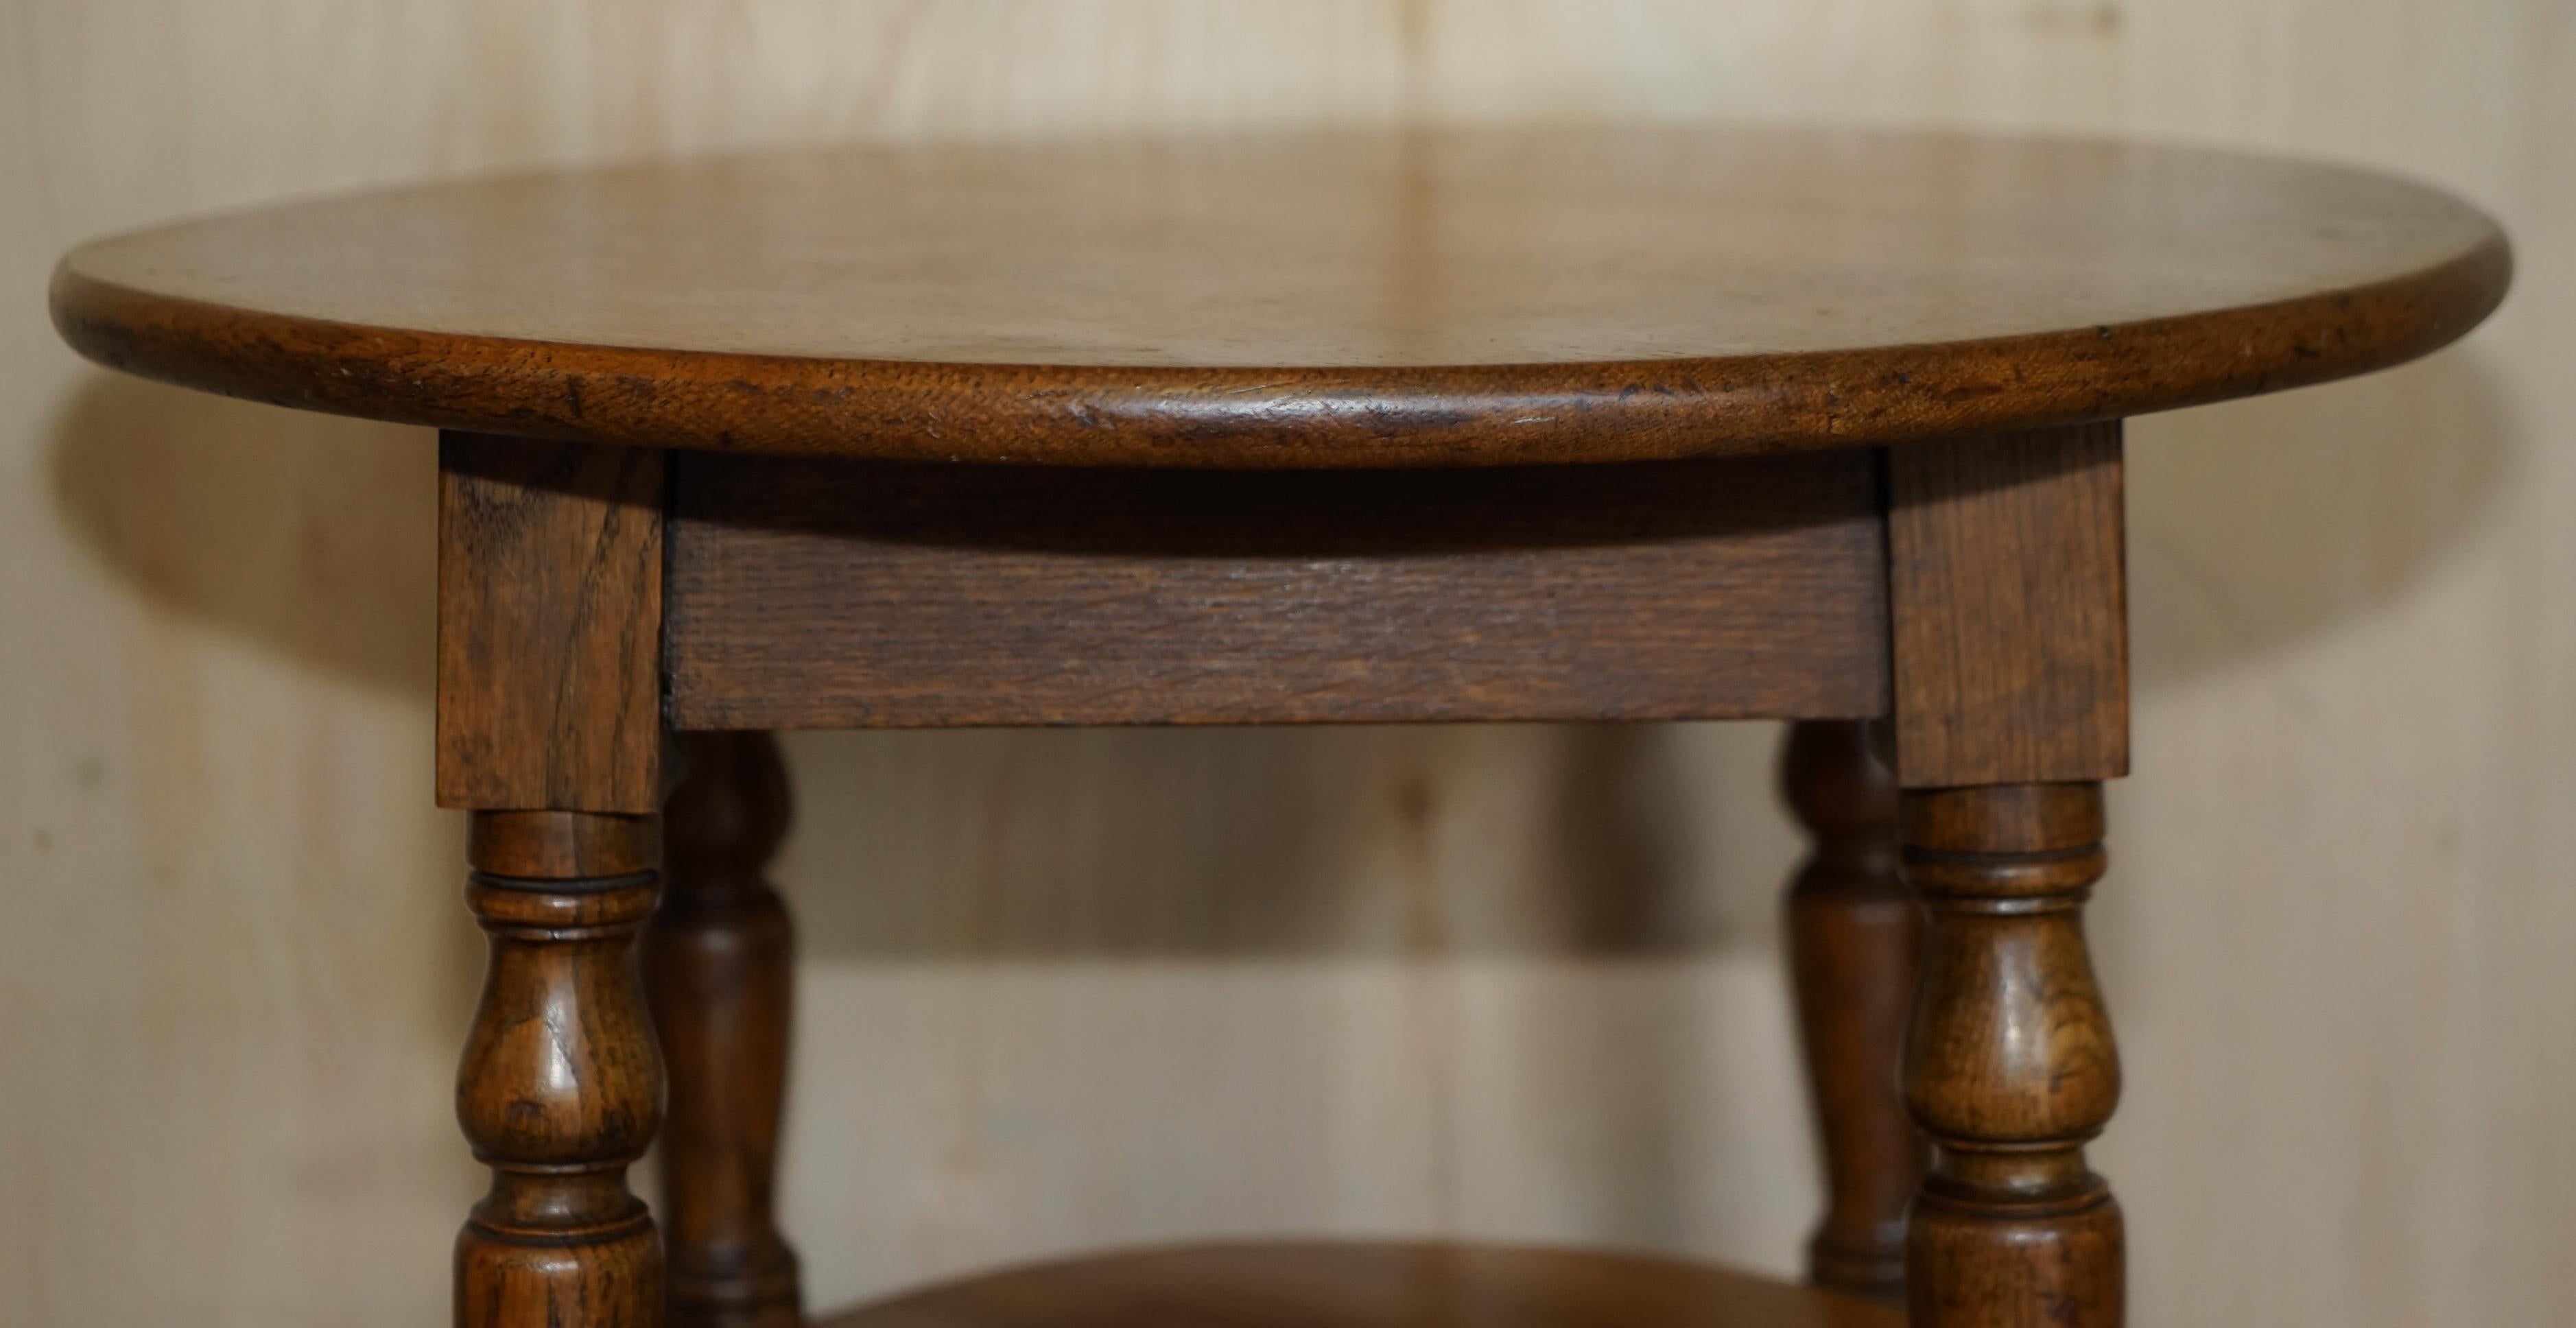 Late Victorian Lovely circa 1900 English Oak Side Table with Turned Legs and a Nice Rich Patina For Sale